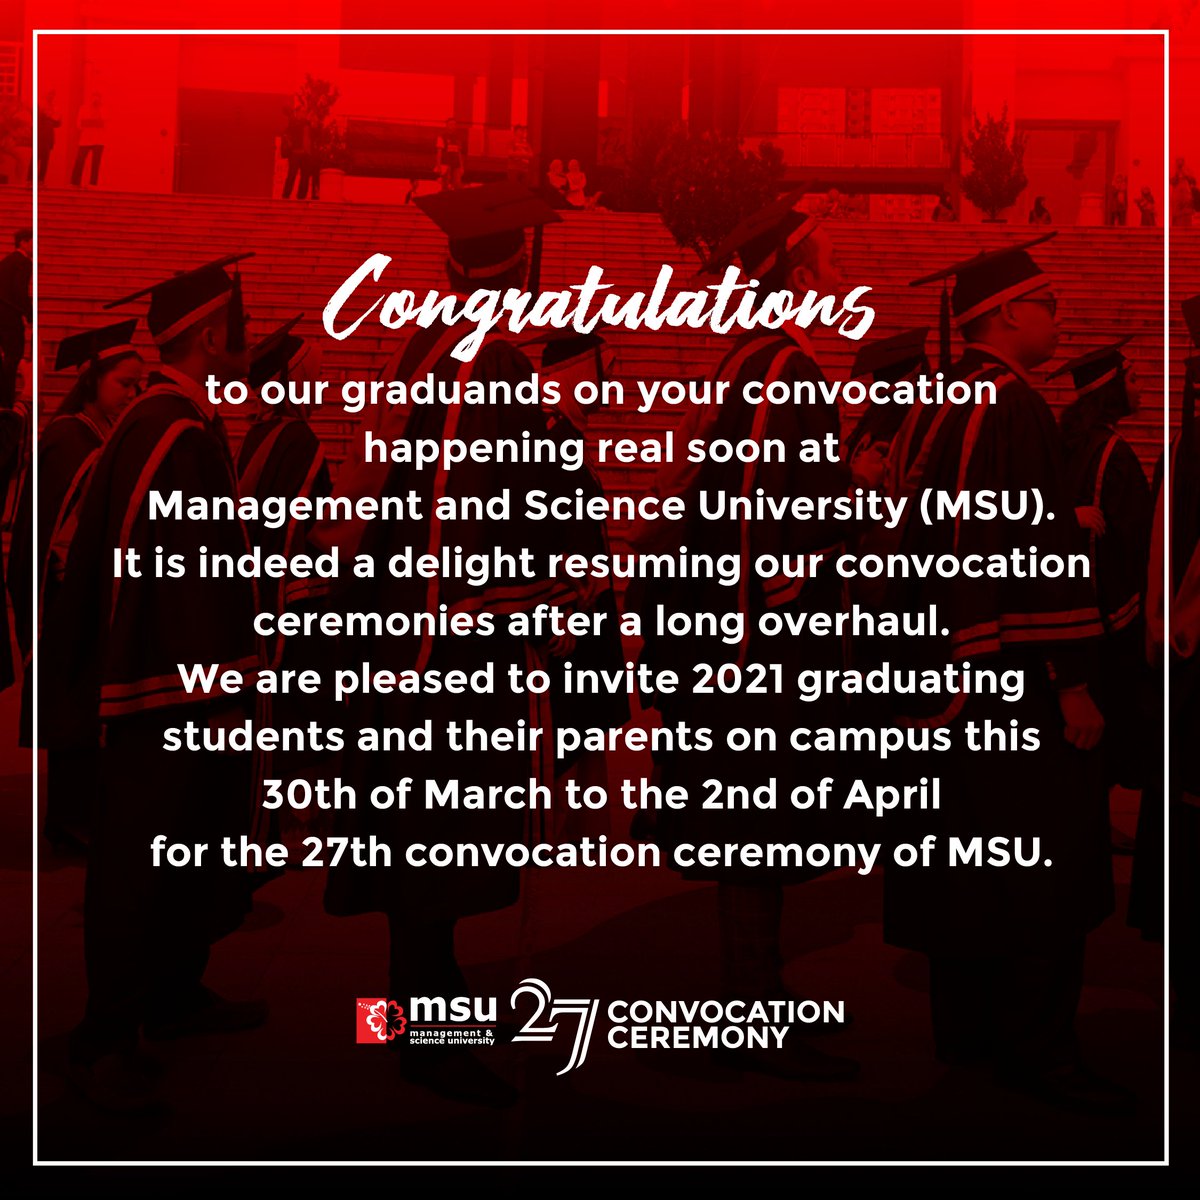 A few more weeks until the MSU 27th Convocation Ceremony! The official event has been rescheduled on 30th March 2021 until 2nd April 2021.

Follow us at @MSUconvo for more updates! 
More info: www2.msu.edu.my/msuconvo27/

#MSUconvo27🎓
#MSUmalaysia